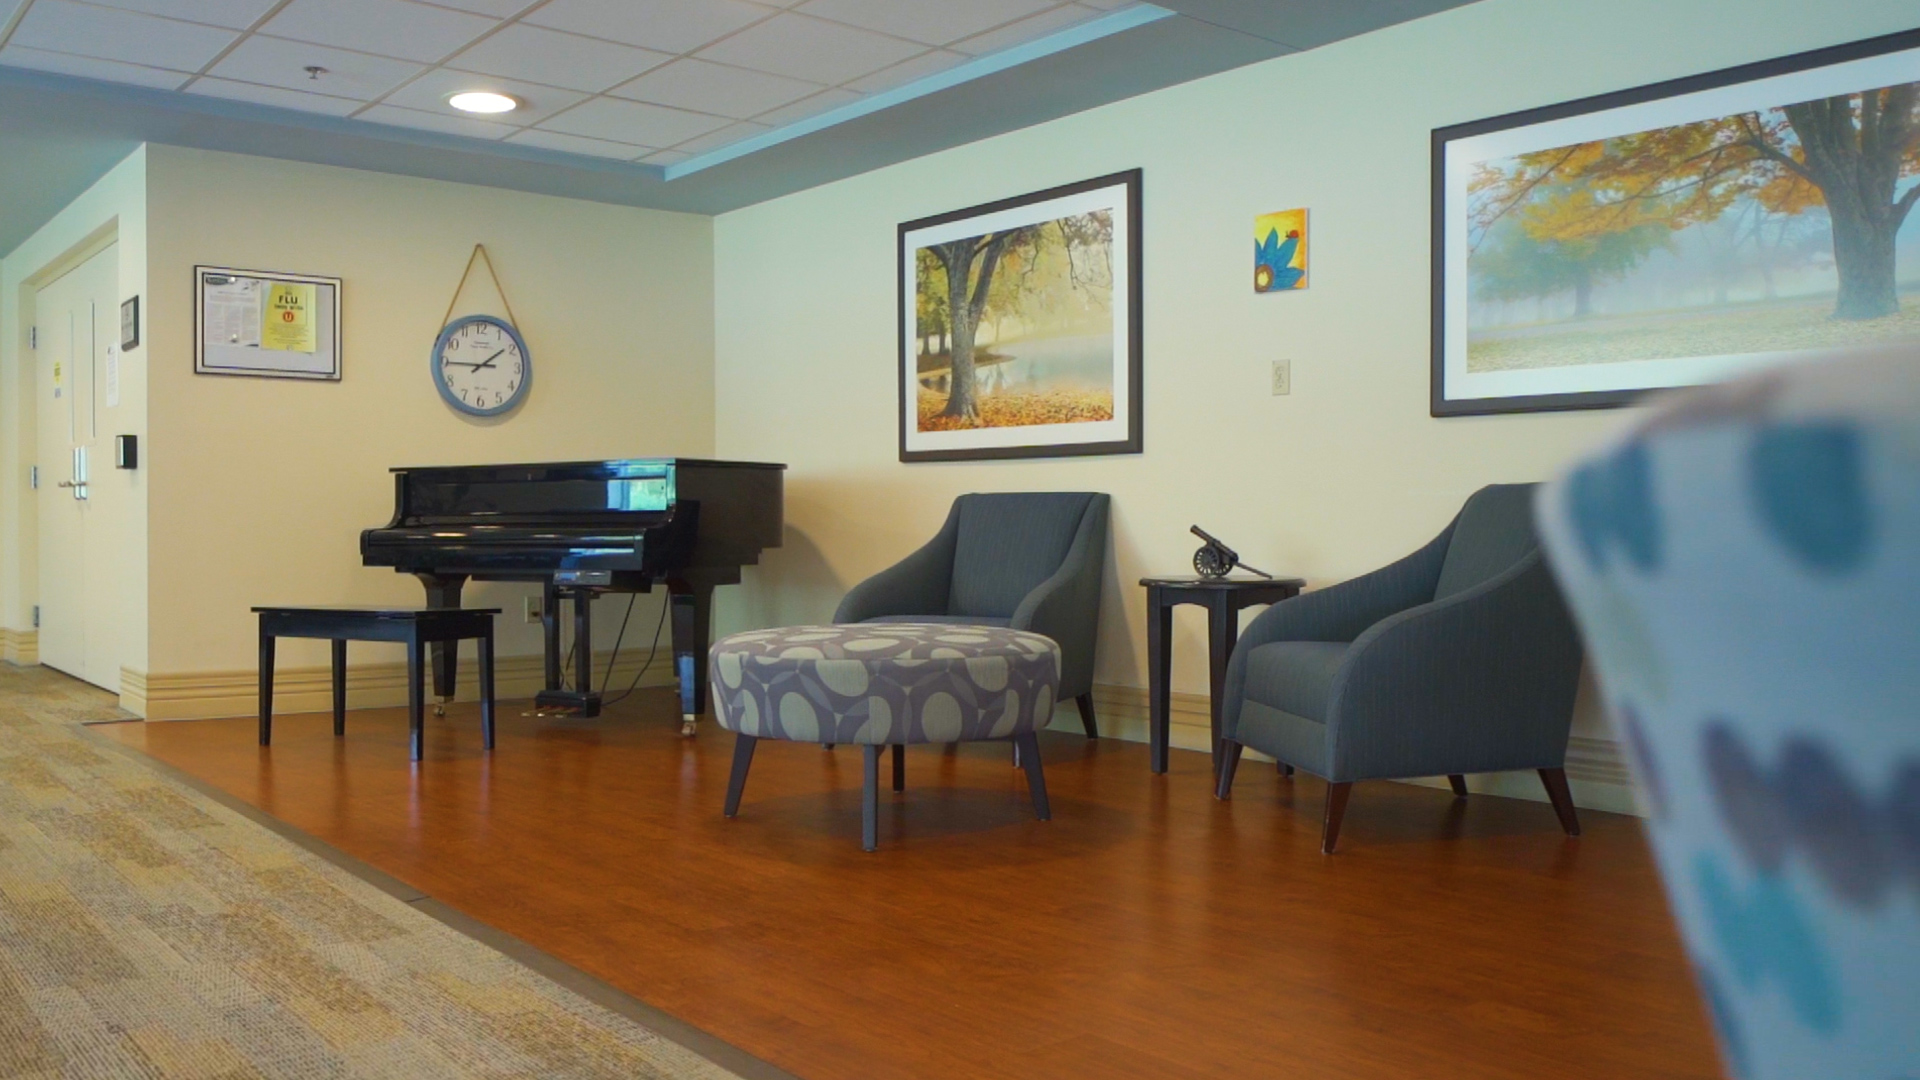 Black Piano with sofa and mini table on the side. Picture frames and a clock on the wall.